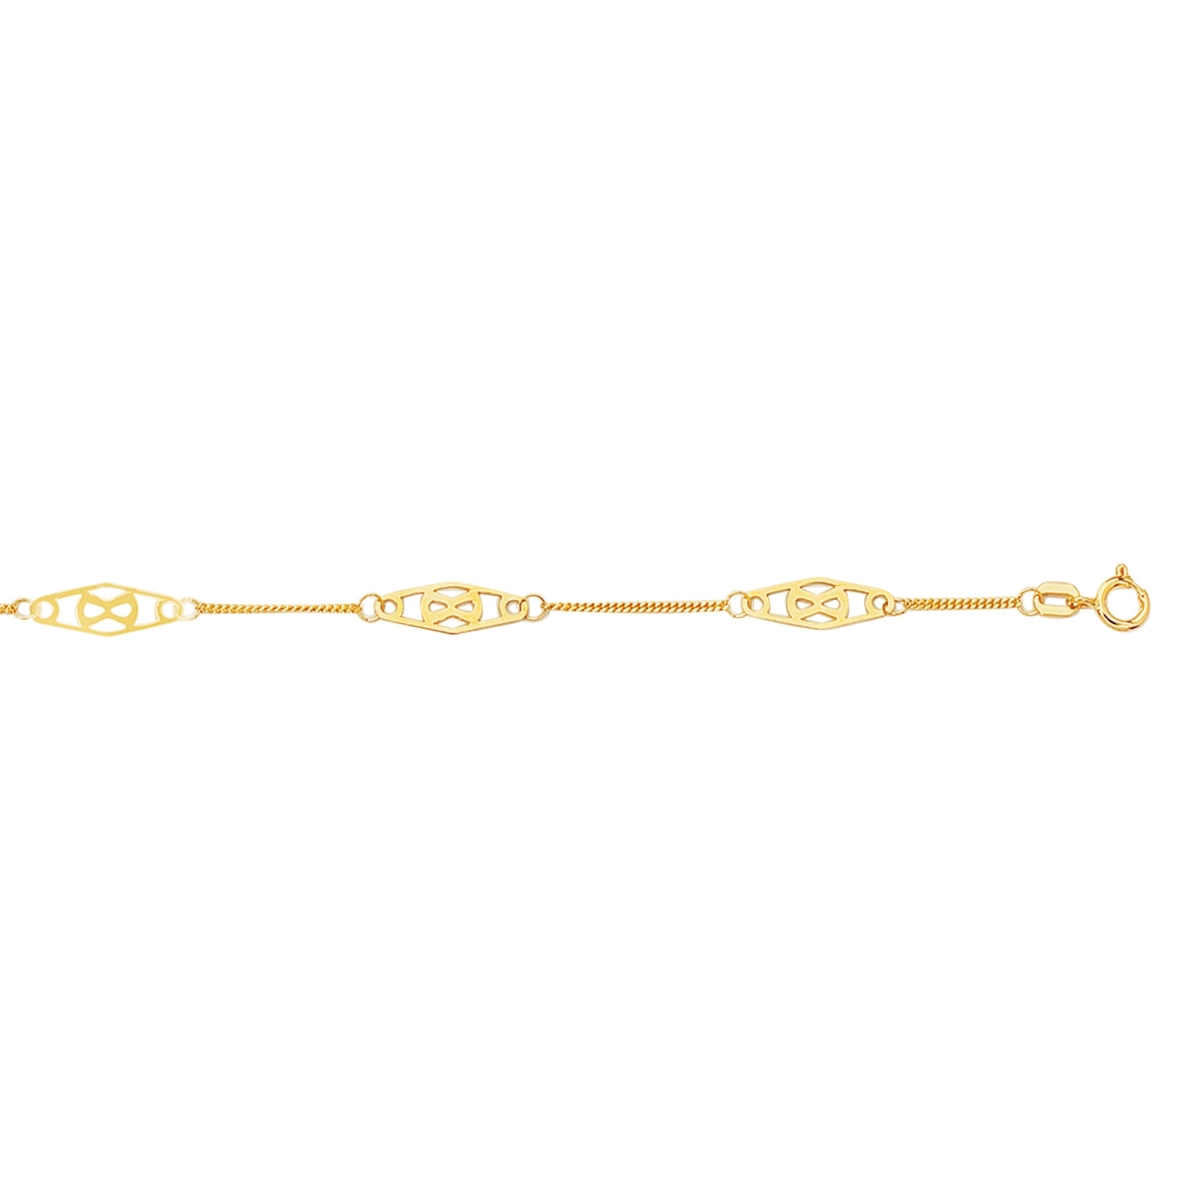 Picture of Royal Chain ANK138-10 10 in. 14K Yellow Gold Diamond Cut Textured Anklet with Spring Ring Clasp